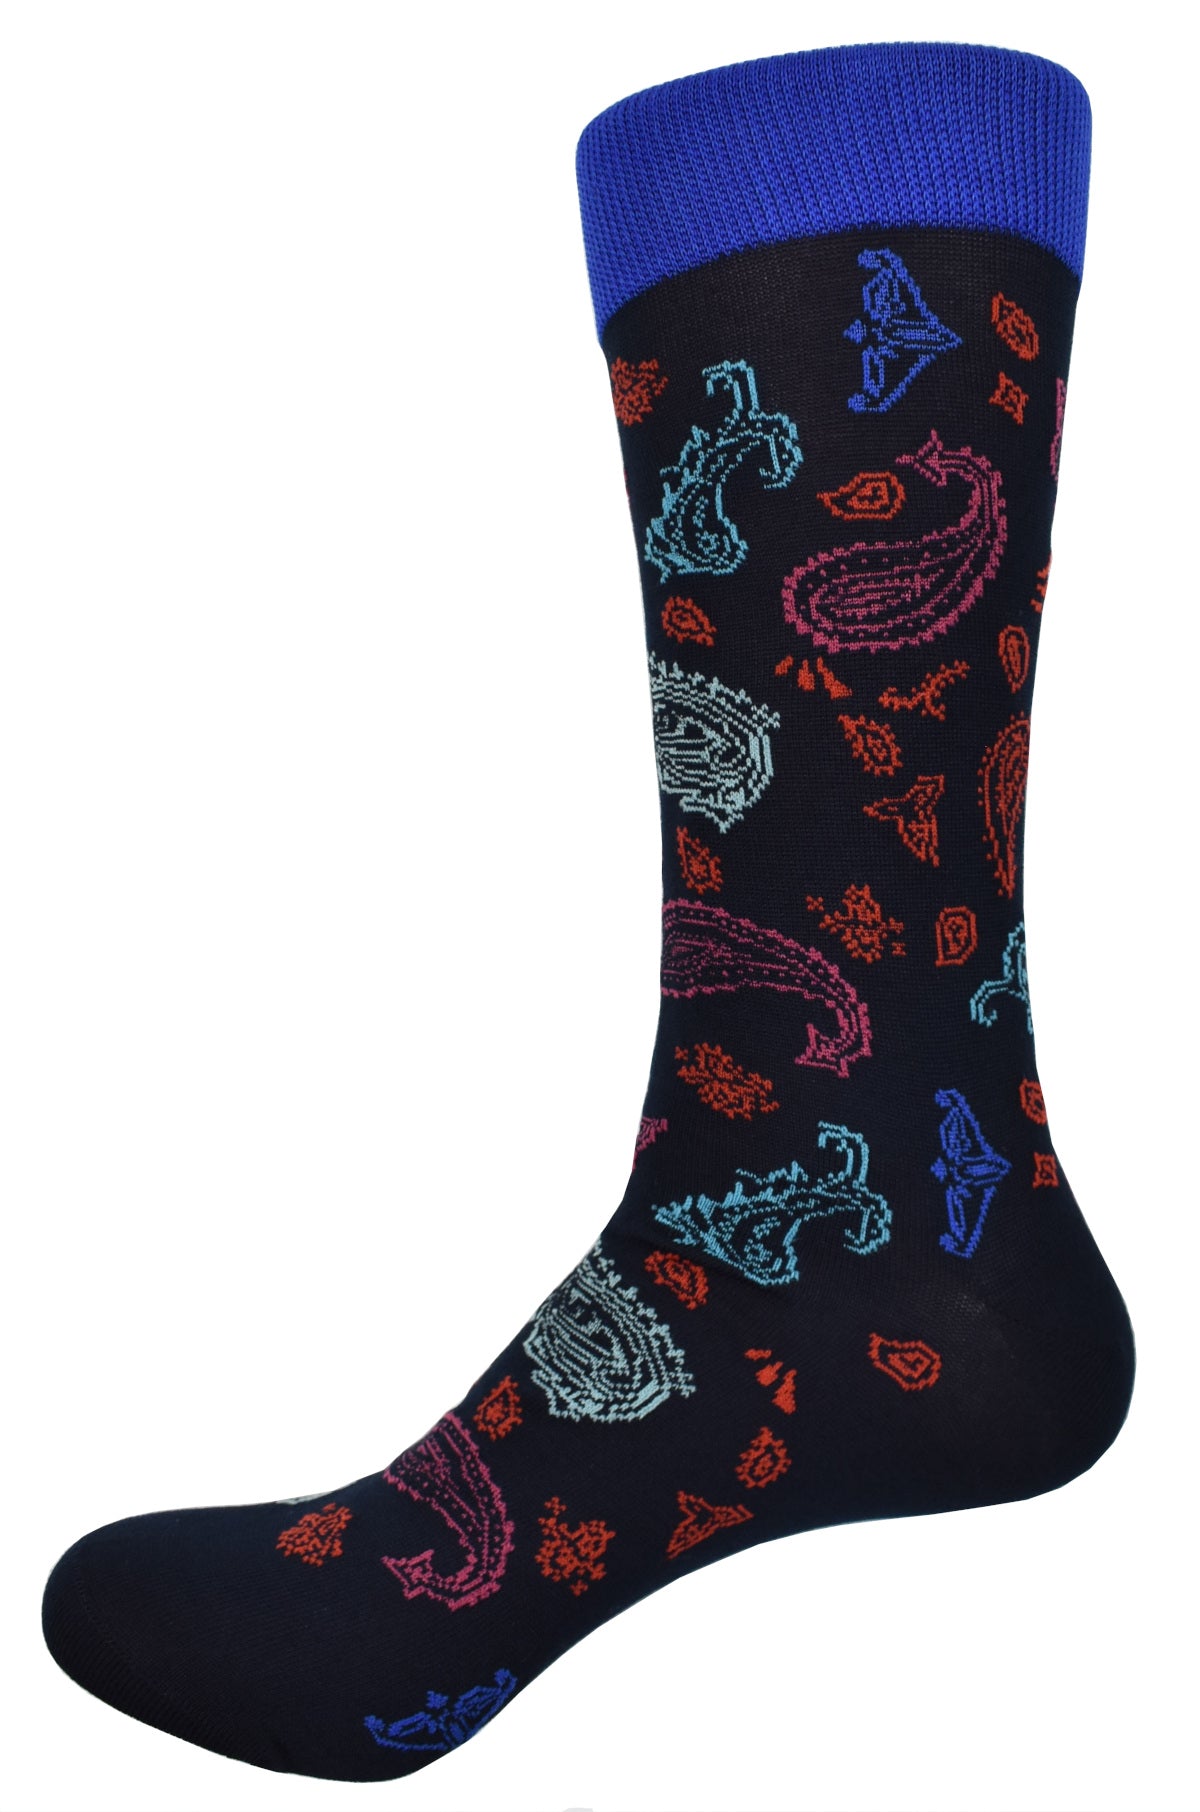 Mercerized cotton sock with a little spandex for comfort and to hold its shape.  Open diamond pattern in rich colors adds life to any outfit.  Mid calf, fits average sizes 8 to 12.